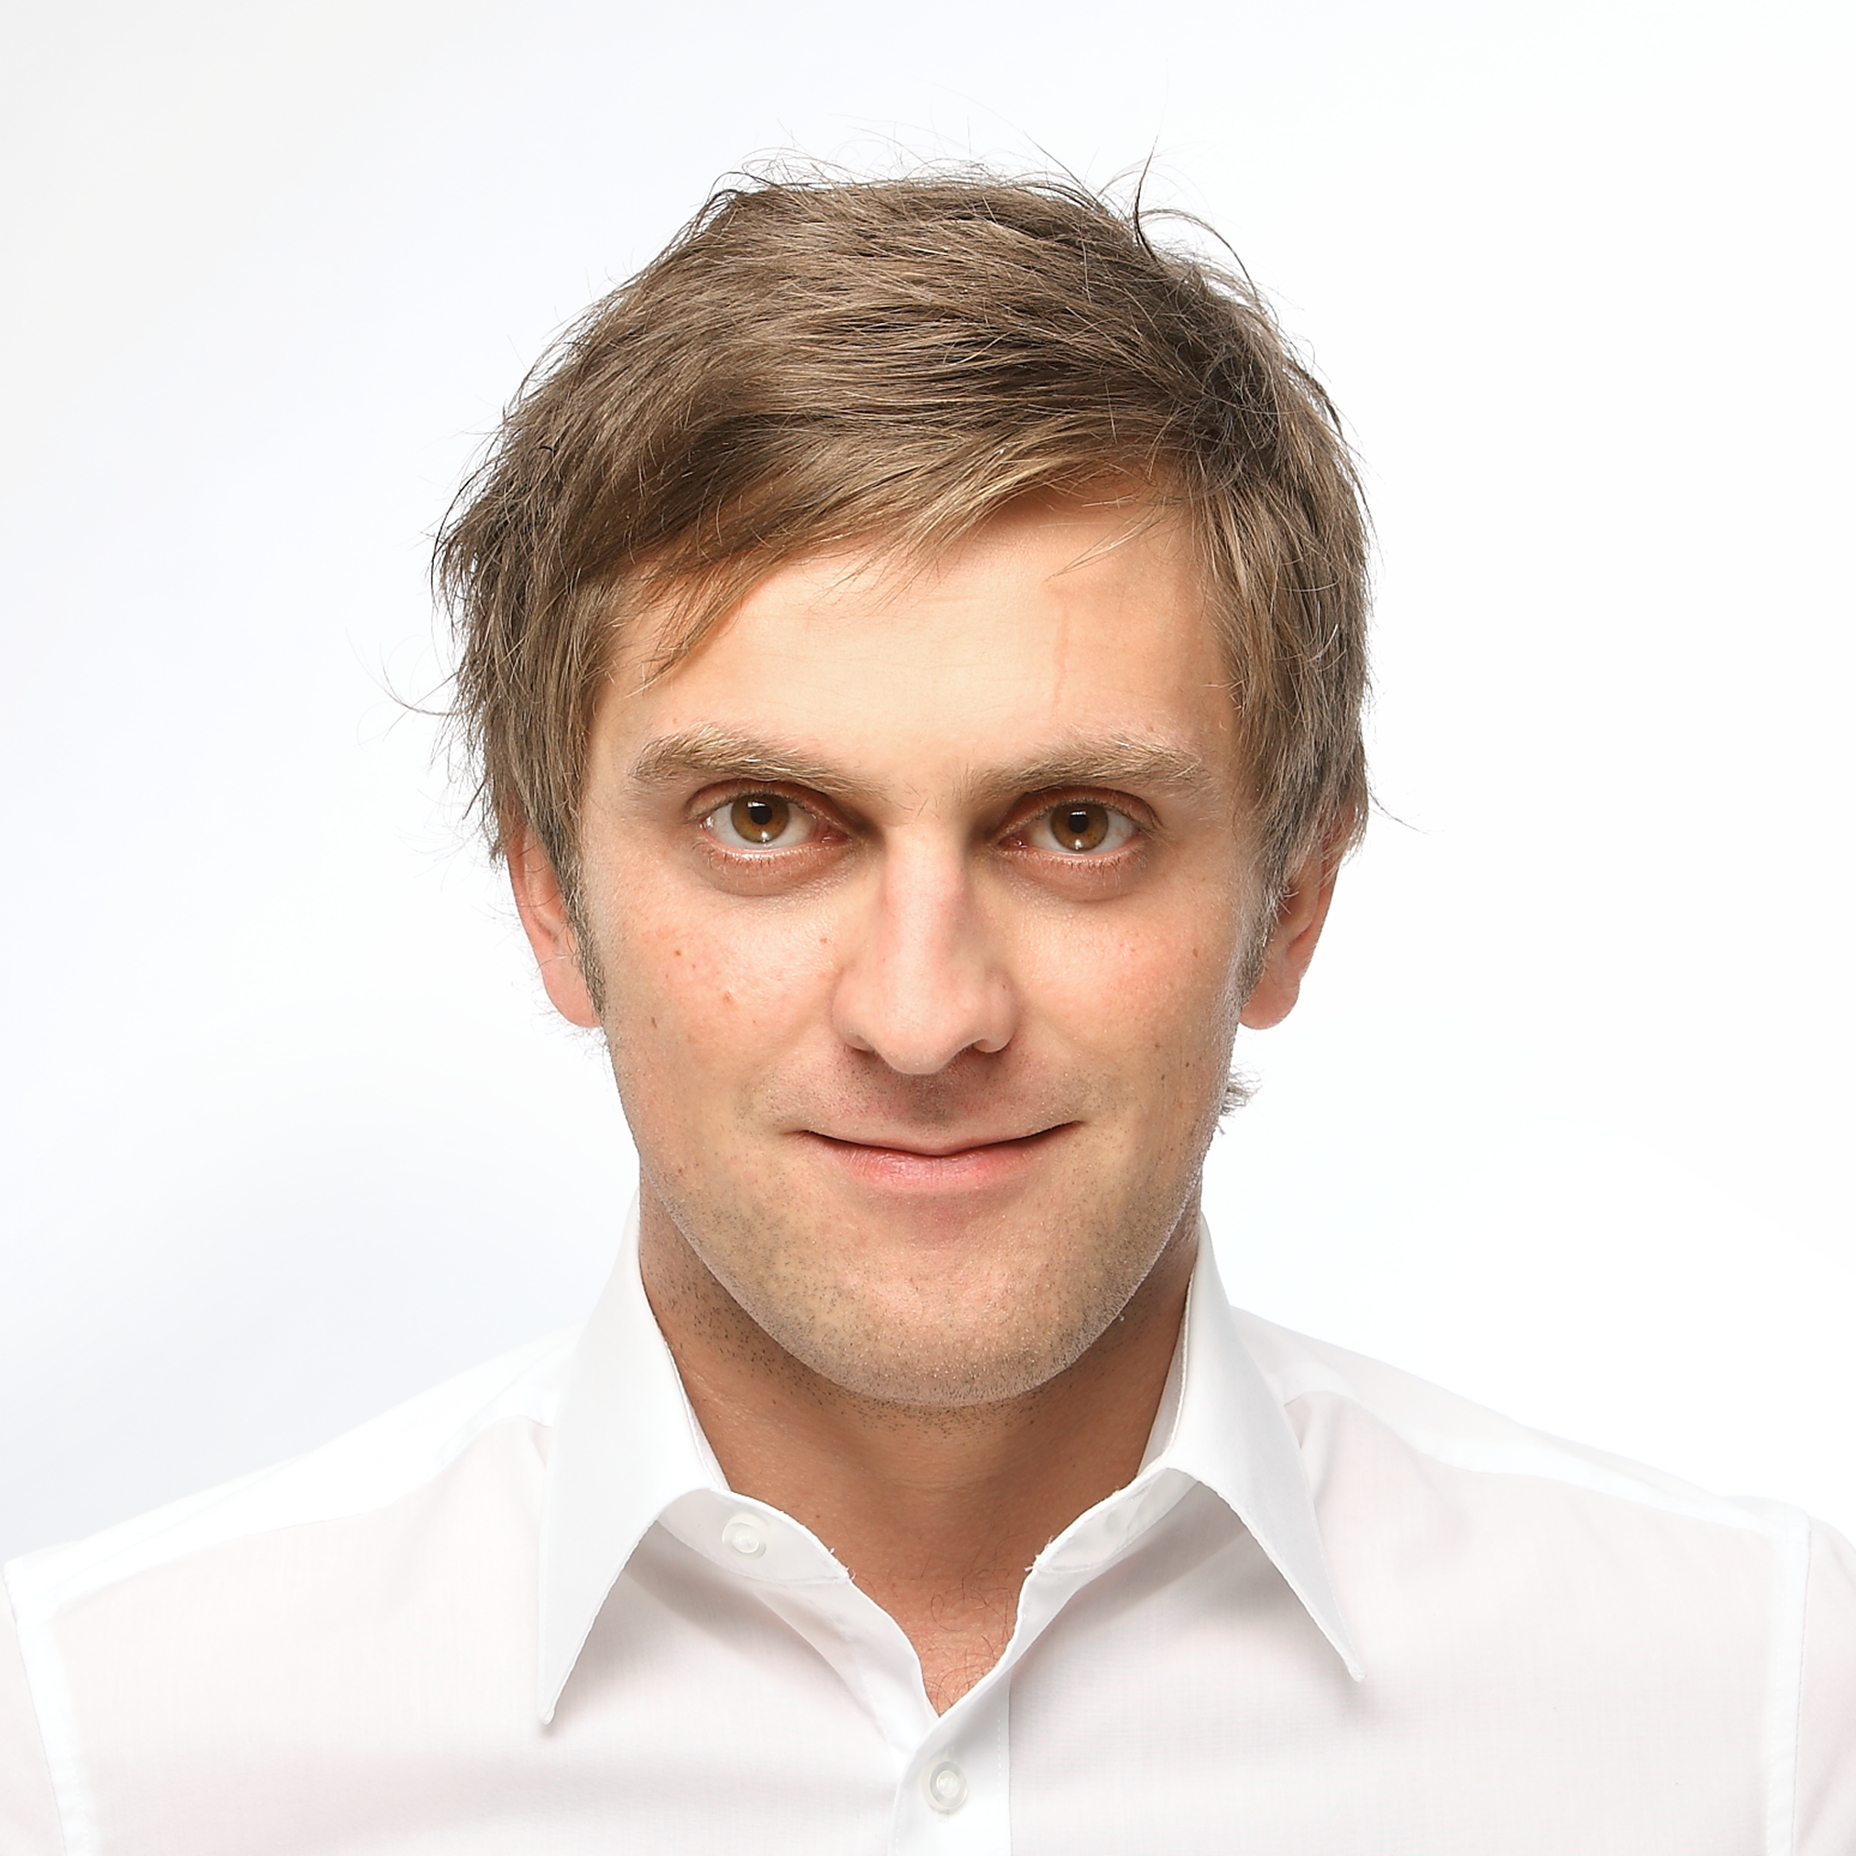 Tobias Schiffelholz, head of Service and Support at Kutzschbach Electronic